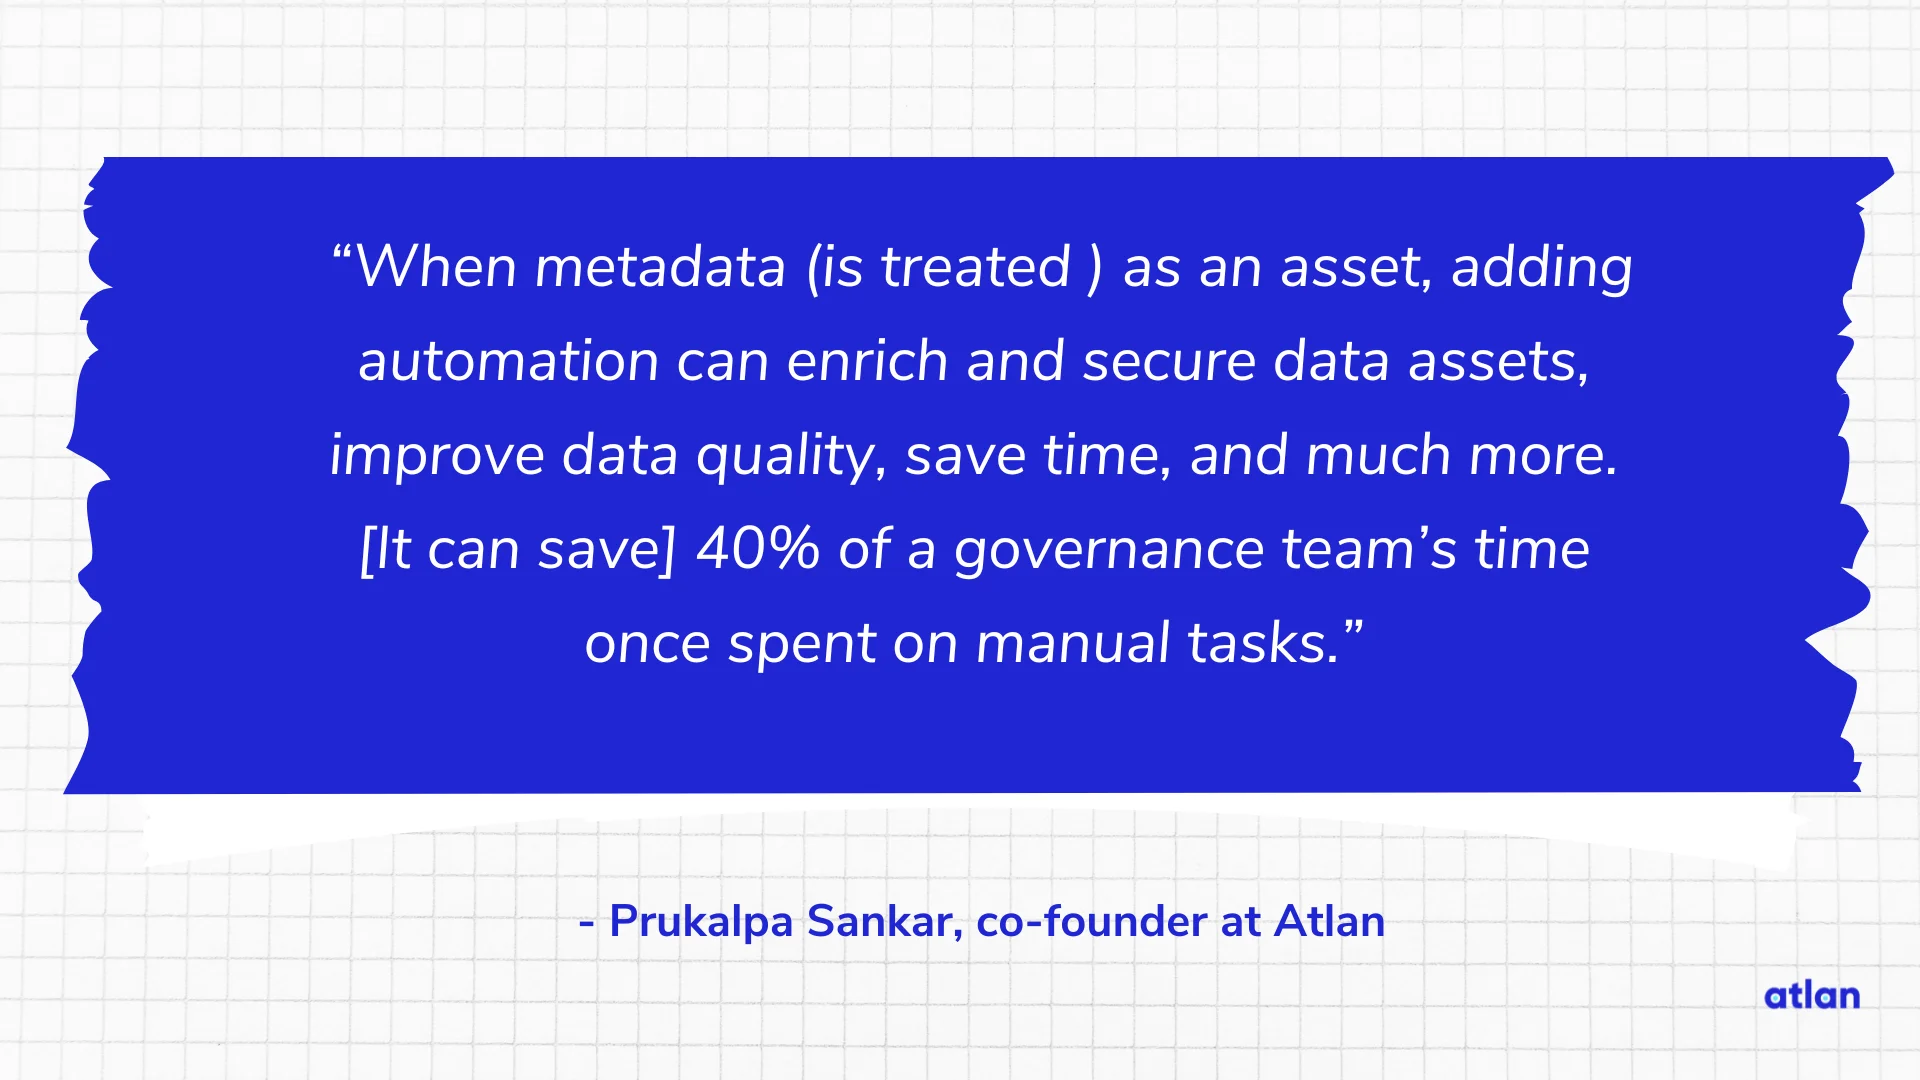 Adding automation can enrich and secure data assets, improve data quality, save time